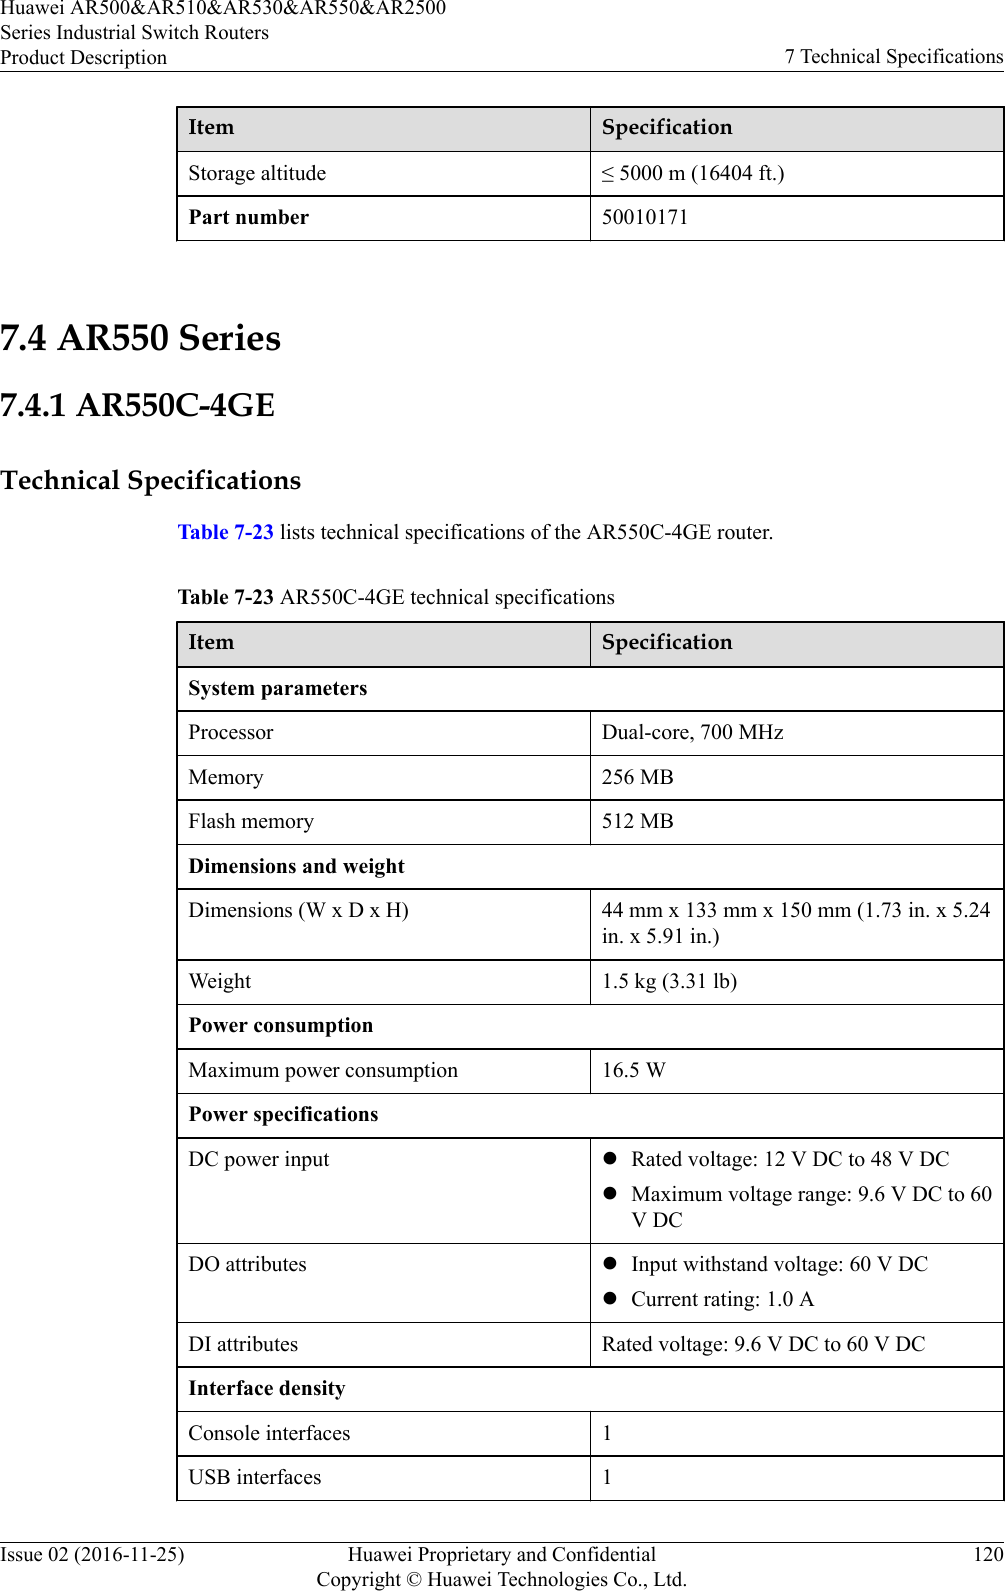 Item SpecificationStorage altitude ≤ 5000 m (16404 ft.)Part number 50010171 7.4 AR550 Series7.4.1 AR550C-4GETechnical SpecificationsTable 7-23 lists technical specifications of the AR550C-4GE router.Table 7-23 AR550C-4GE technical specificationsItem SpecificationSystem parametersProcessor Dual-core, 700 MHzMemory 256 MBFlash memory 512 MBDimensions and weightDimensions (W x D x H) 44 mm x 133 mm x 150 mm (1.73 in. x 5.24in. x 5.91 in.)Weight 1.5 kg (3.31 lb)Power consumptionMaximum power consumption 16.5 WPower specificationsDC power input lRated voltage: 12 V DC to 48 V DClMaximum voltage range: 9.6 V DC to 60V DCDO attributes lInput withstand voltage: 60 V DClCurrent rating: 1.0 ADI attributes Rated voltage: 9.6 V DC to 60 V DCInterface densityConsole interfaces 1USB interfaces 1Huawei AR500&amp;AR510&amp;AR530&amp;AR550&amp;AR2500Series Industrial Switch RoutersProduct Description 7 Technical SpecificationsIssue 02 (2016-11-25) Huawei Proprietary and ConfidentialCopyright © Huawei Technologies Co., Ltd.120